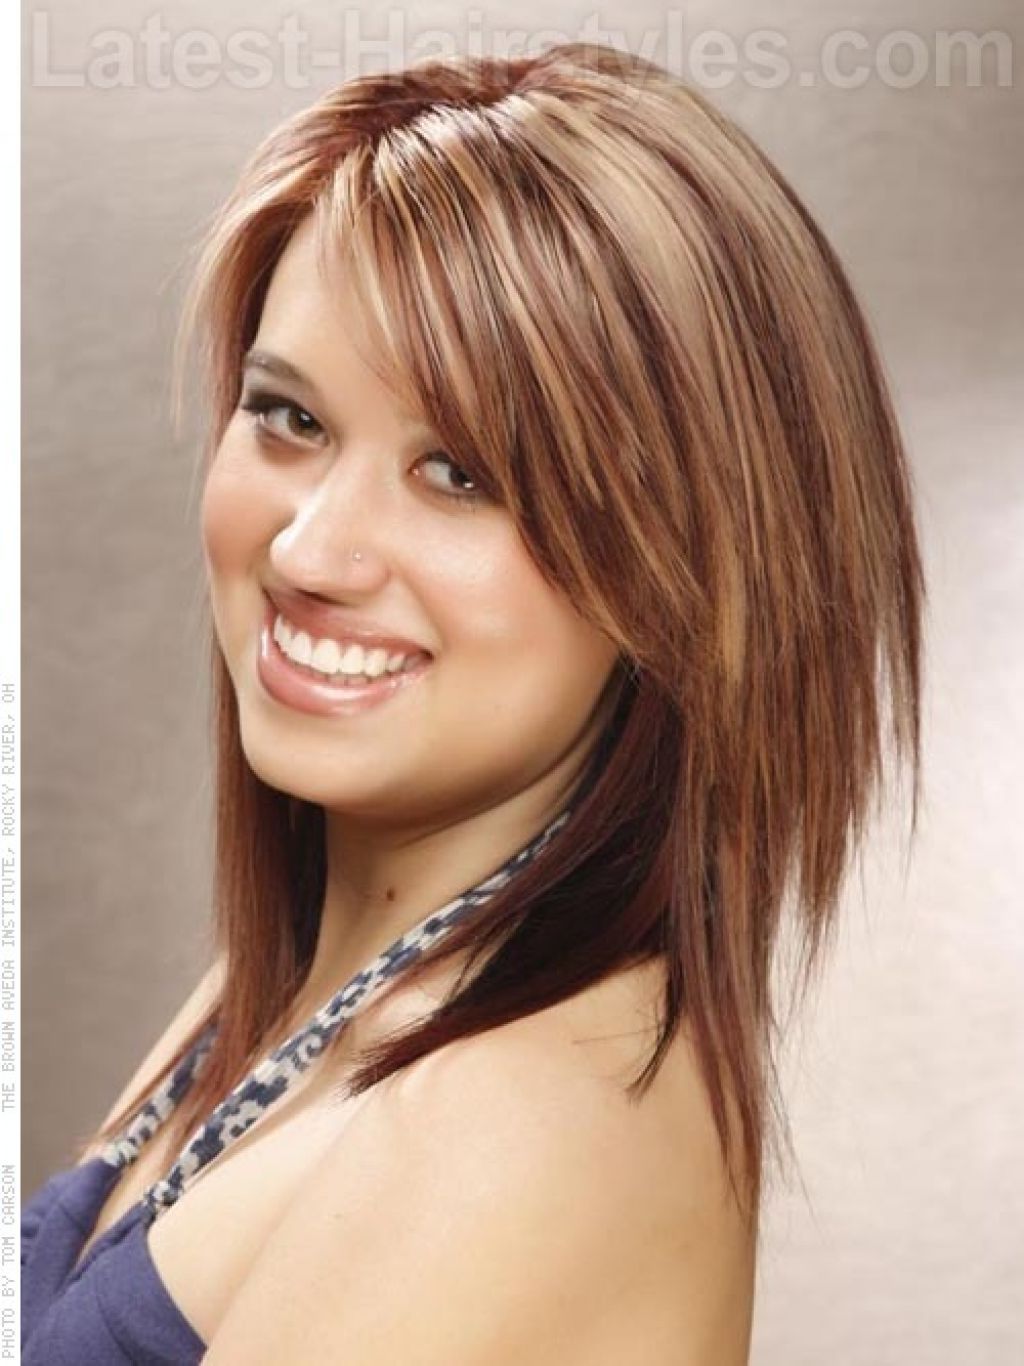 Most Up To Date New Medium Hairstyles For Haircuts For Women 2015 Medium Length » New Medium Hairstyles (View 1 of 20)